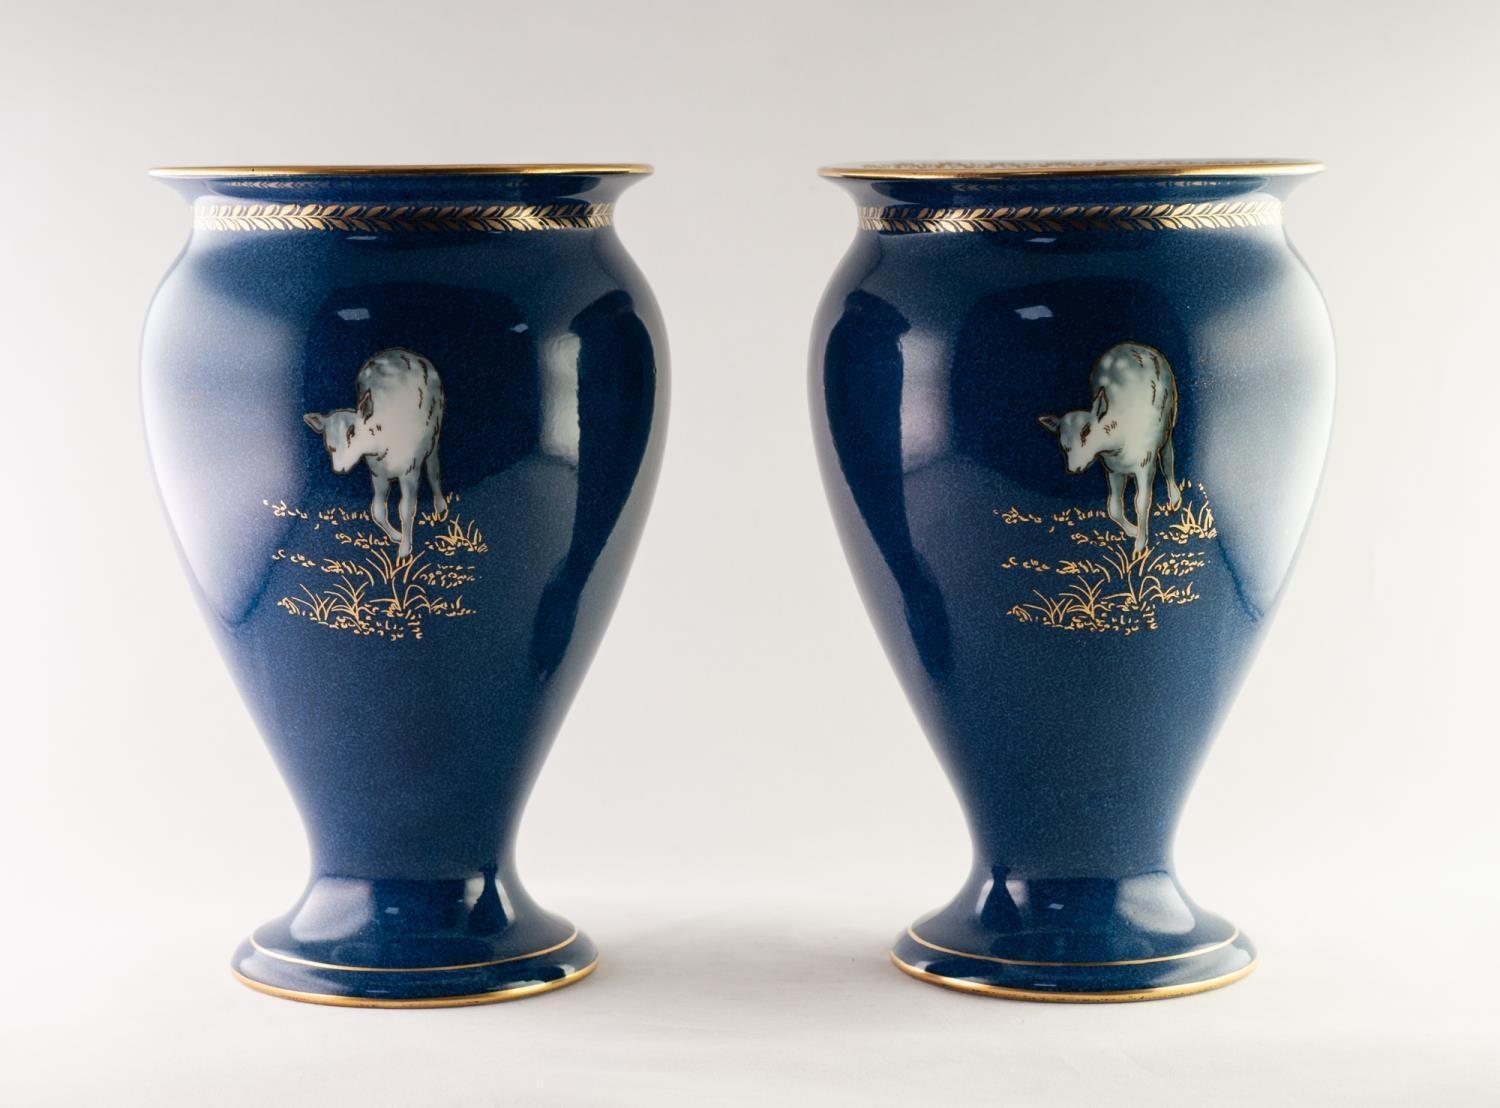 DAISY MAEKIG JONES FOR WEDGWWOD, PAIR OF CHINA VASES, decorated with three fawns, outlined in gilt - Image 2 of 3